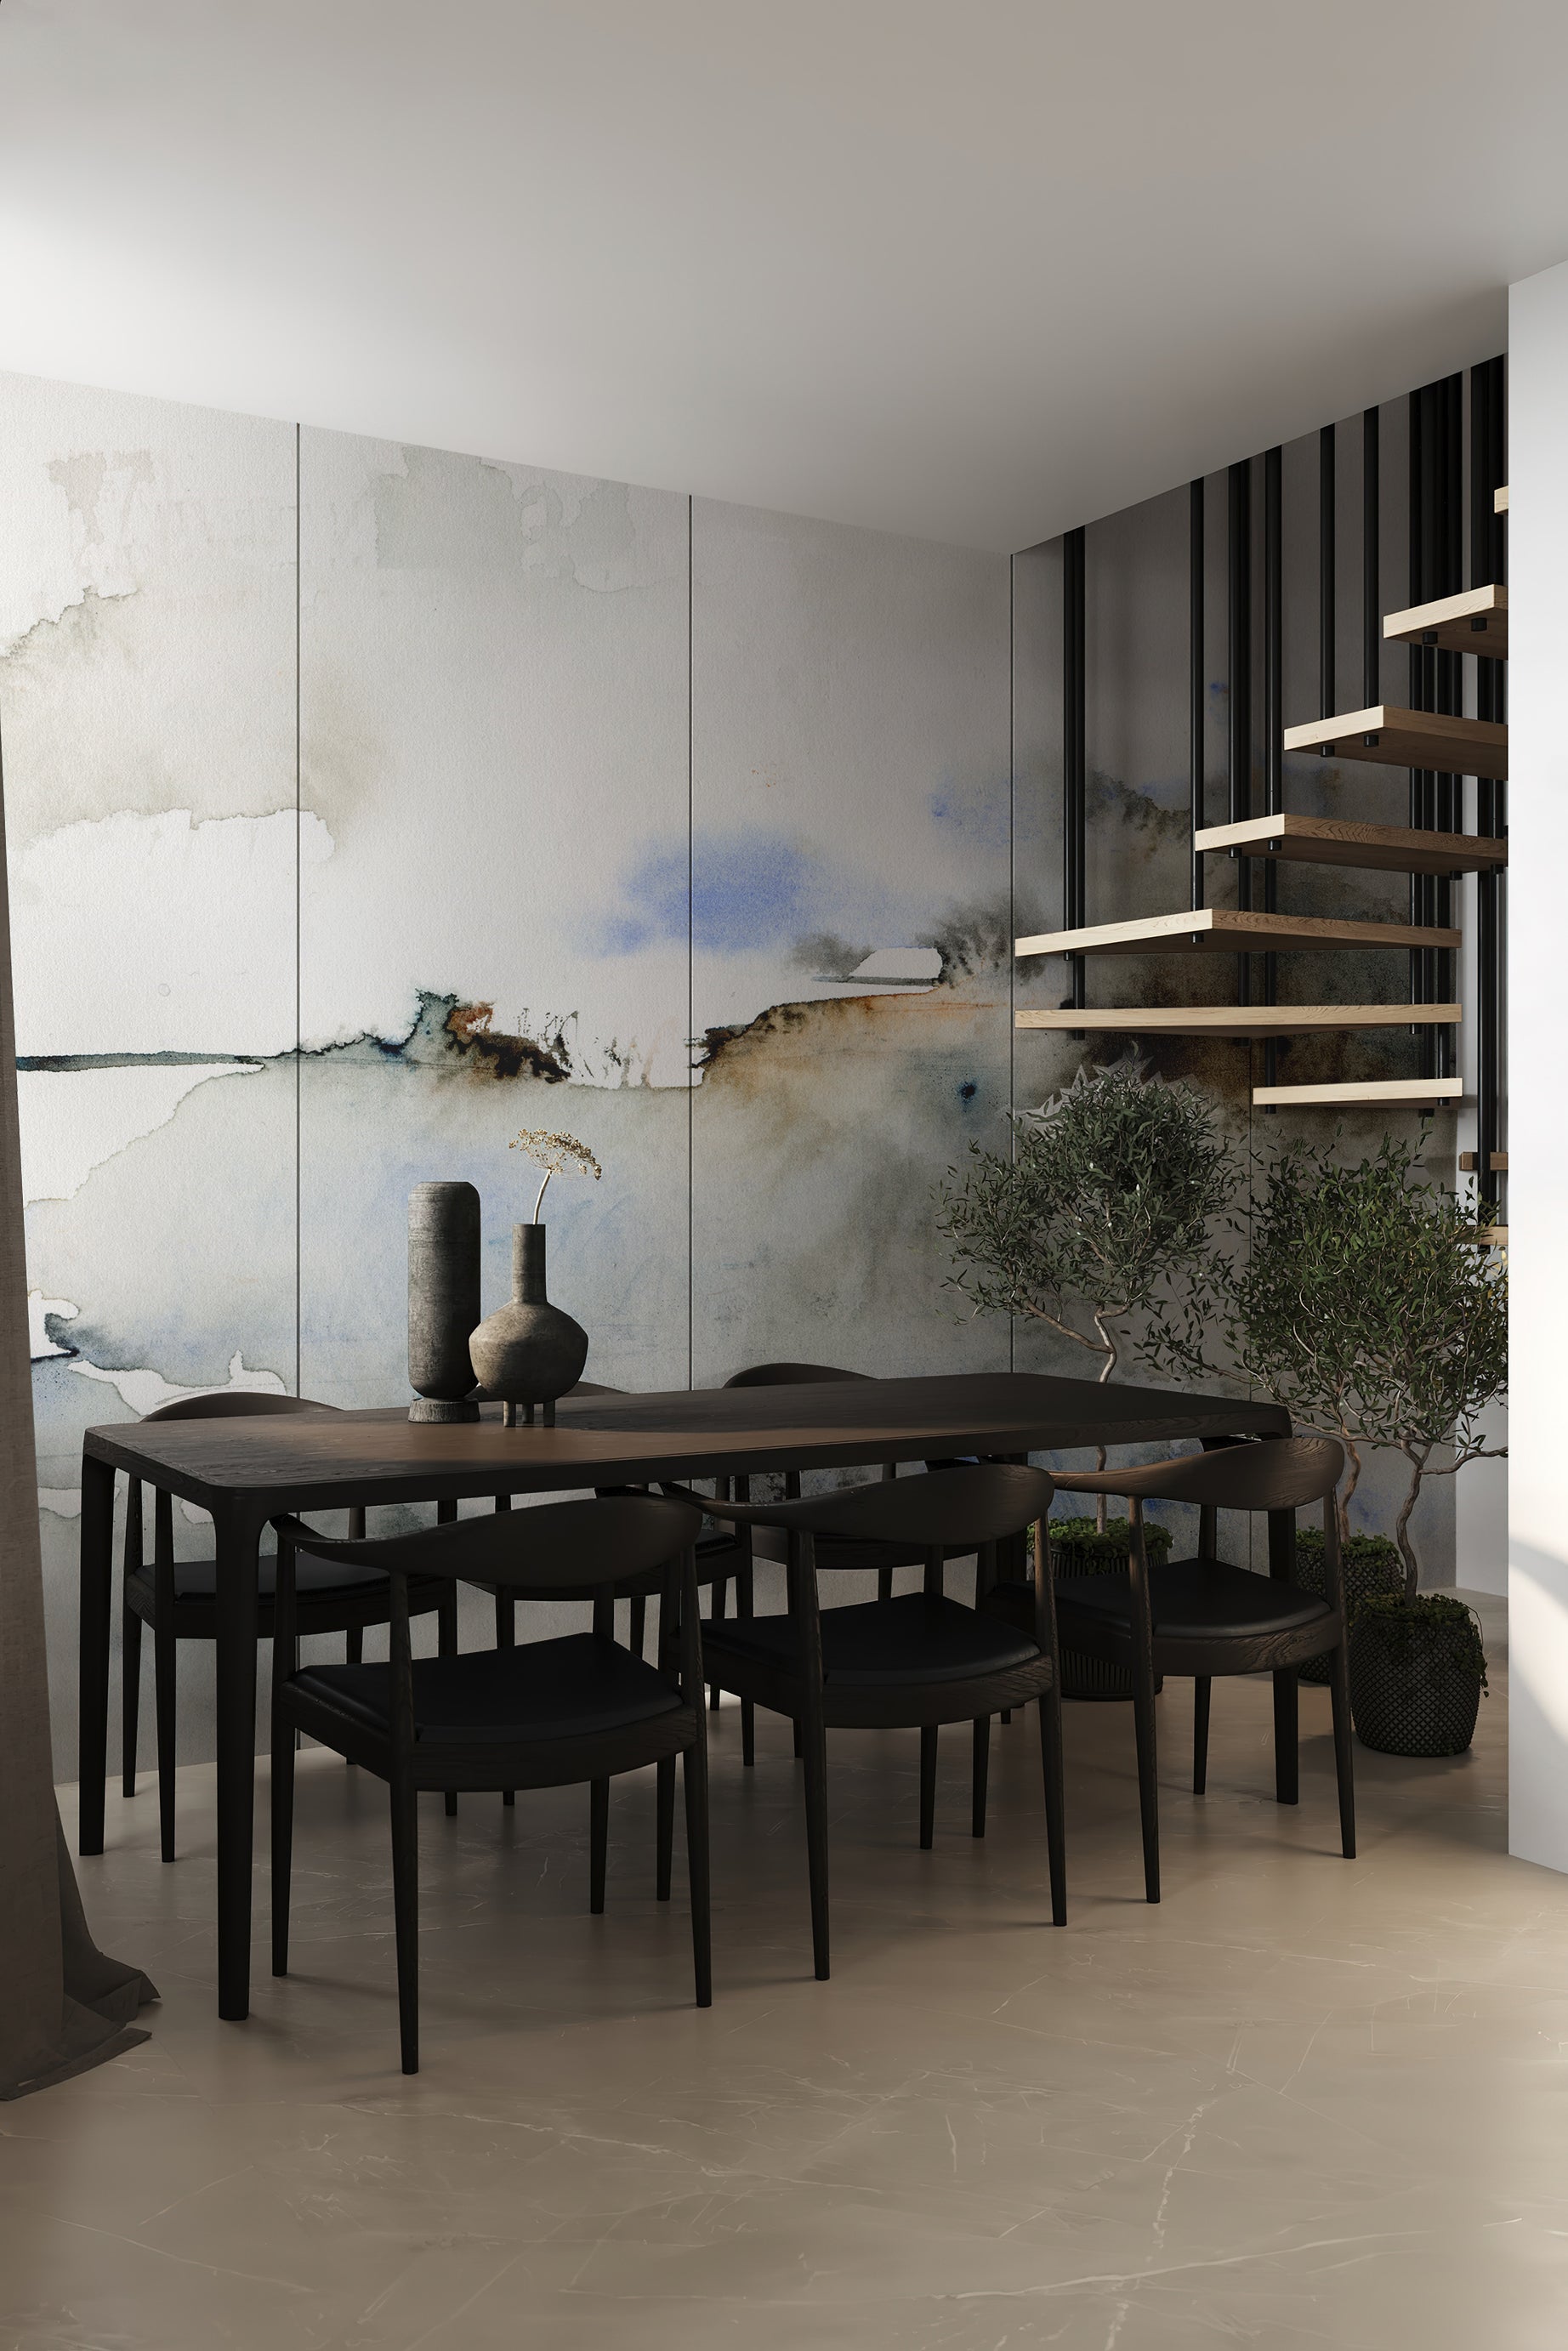 A modern dining area enhanced by the "Atmospheric Mural" wall mural, which brings an artistic, storm-like ambiance to the room. The mural's swirling grays and blues are complemented by the simple black dining set and minimalist decor, creating a dramatic yet calm dining environment.